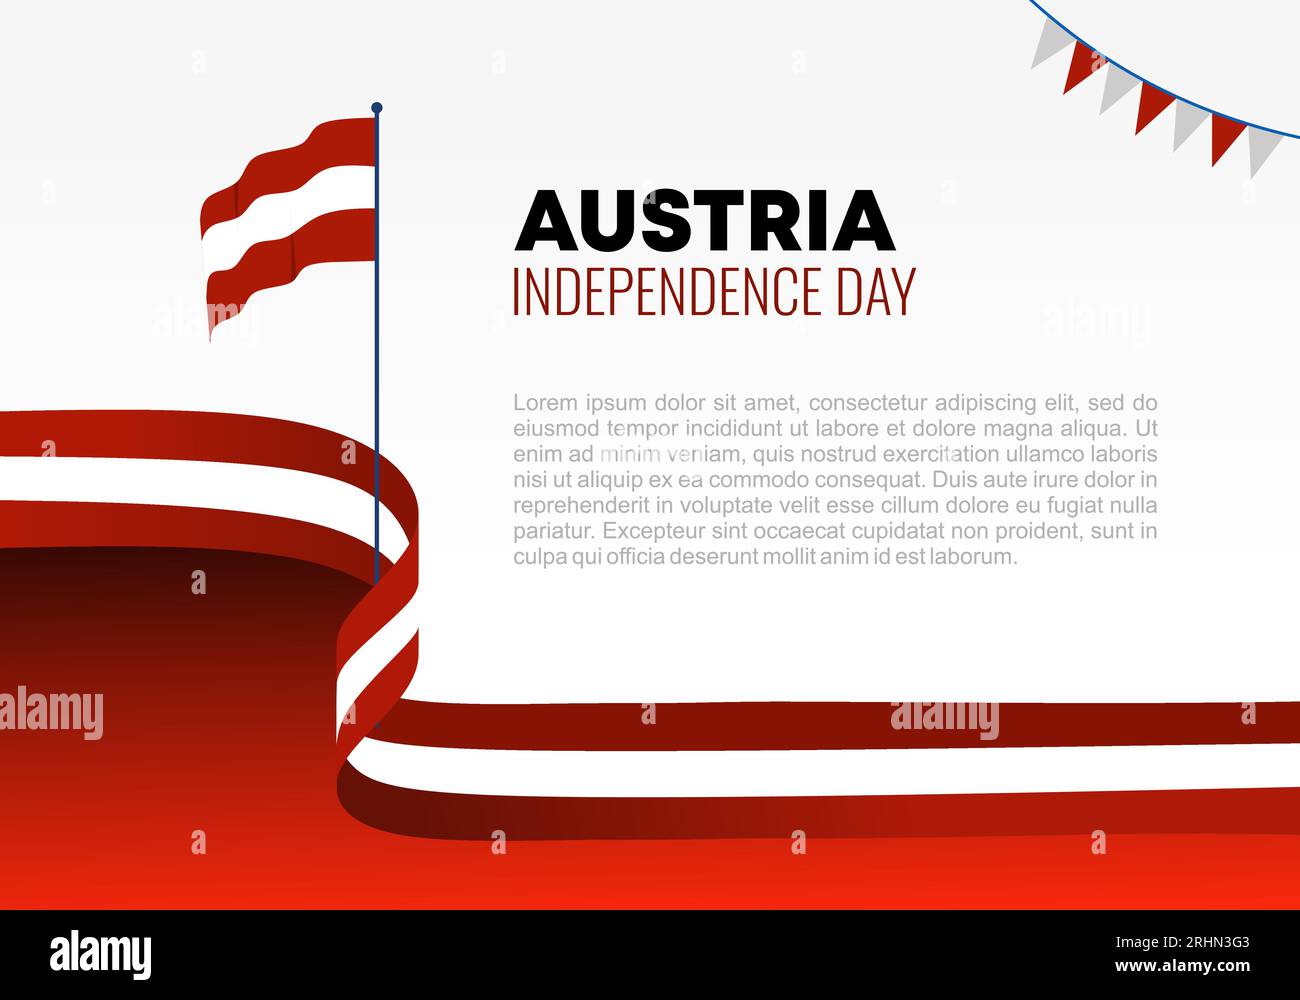 Austria independence day background for national celebration on October 26. Stock Vector